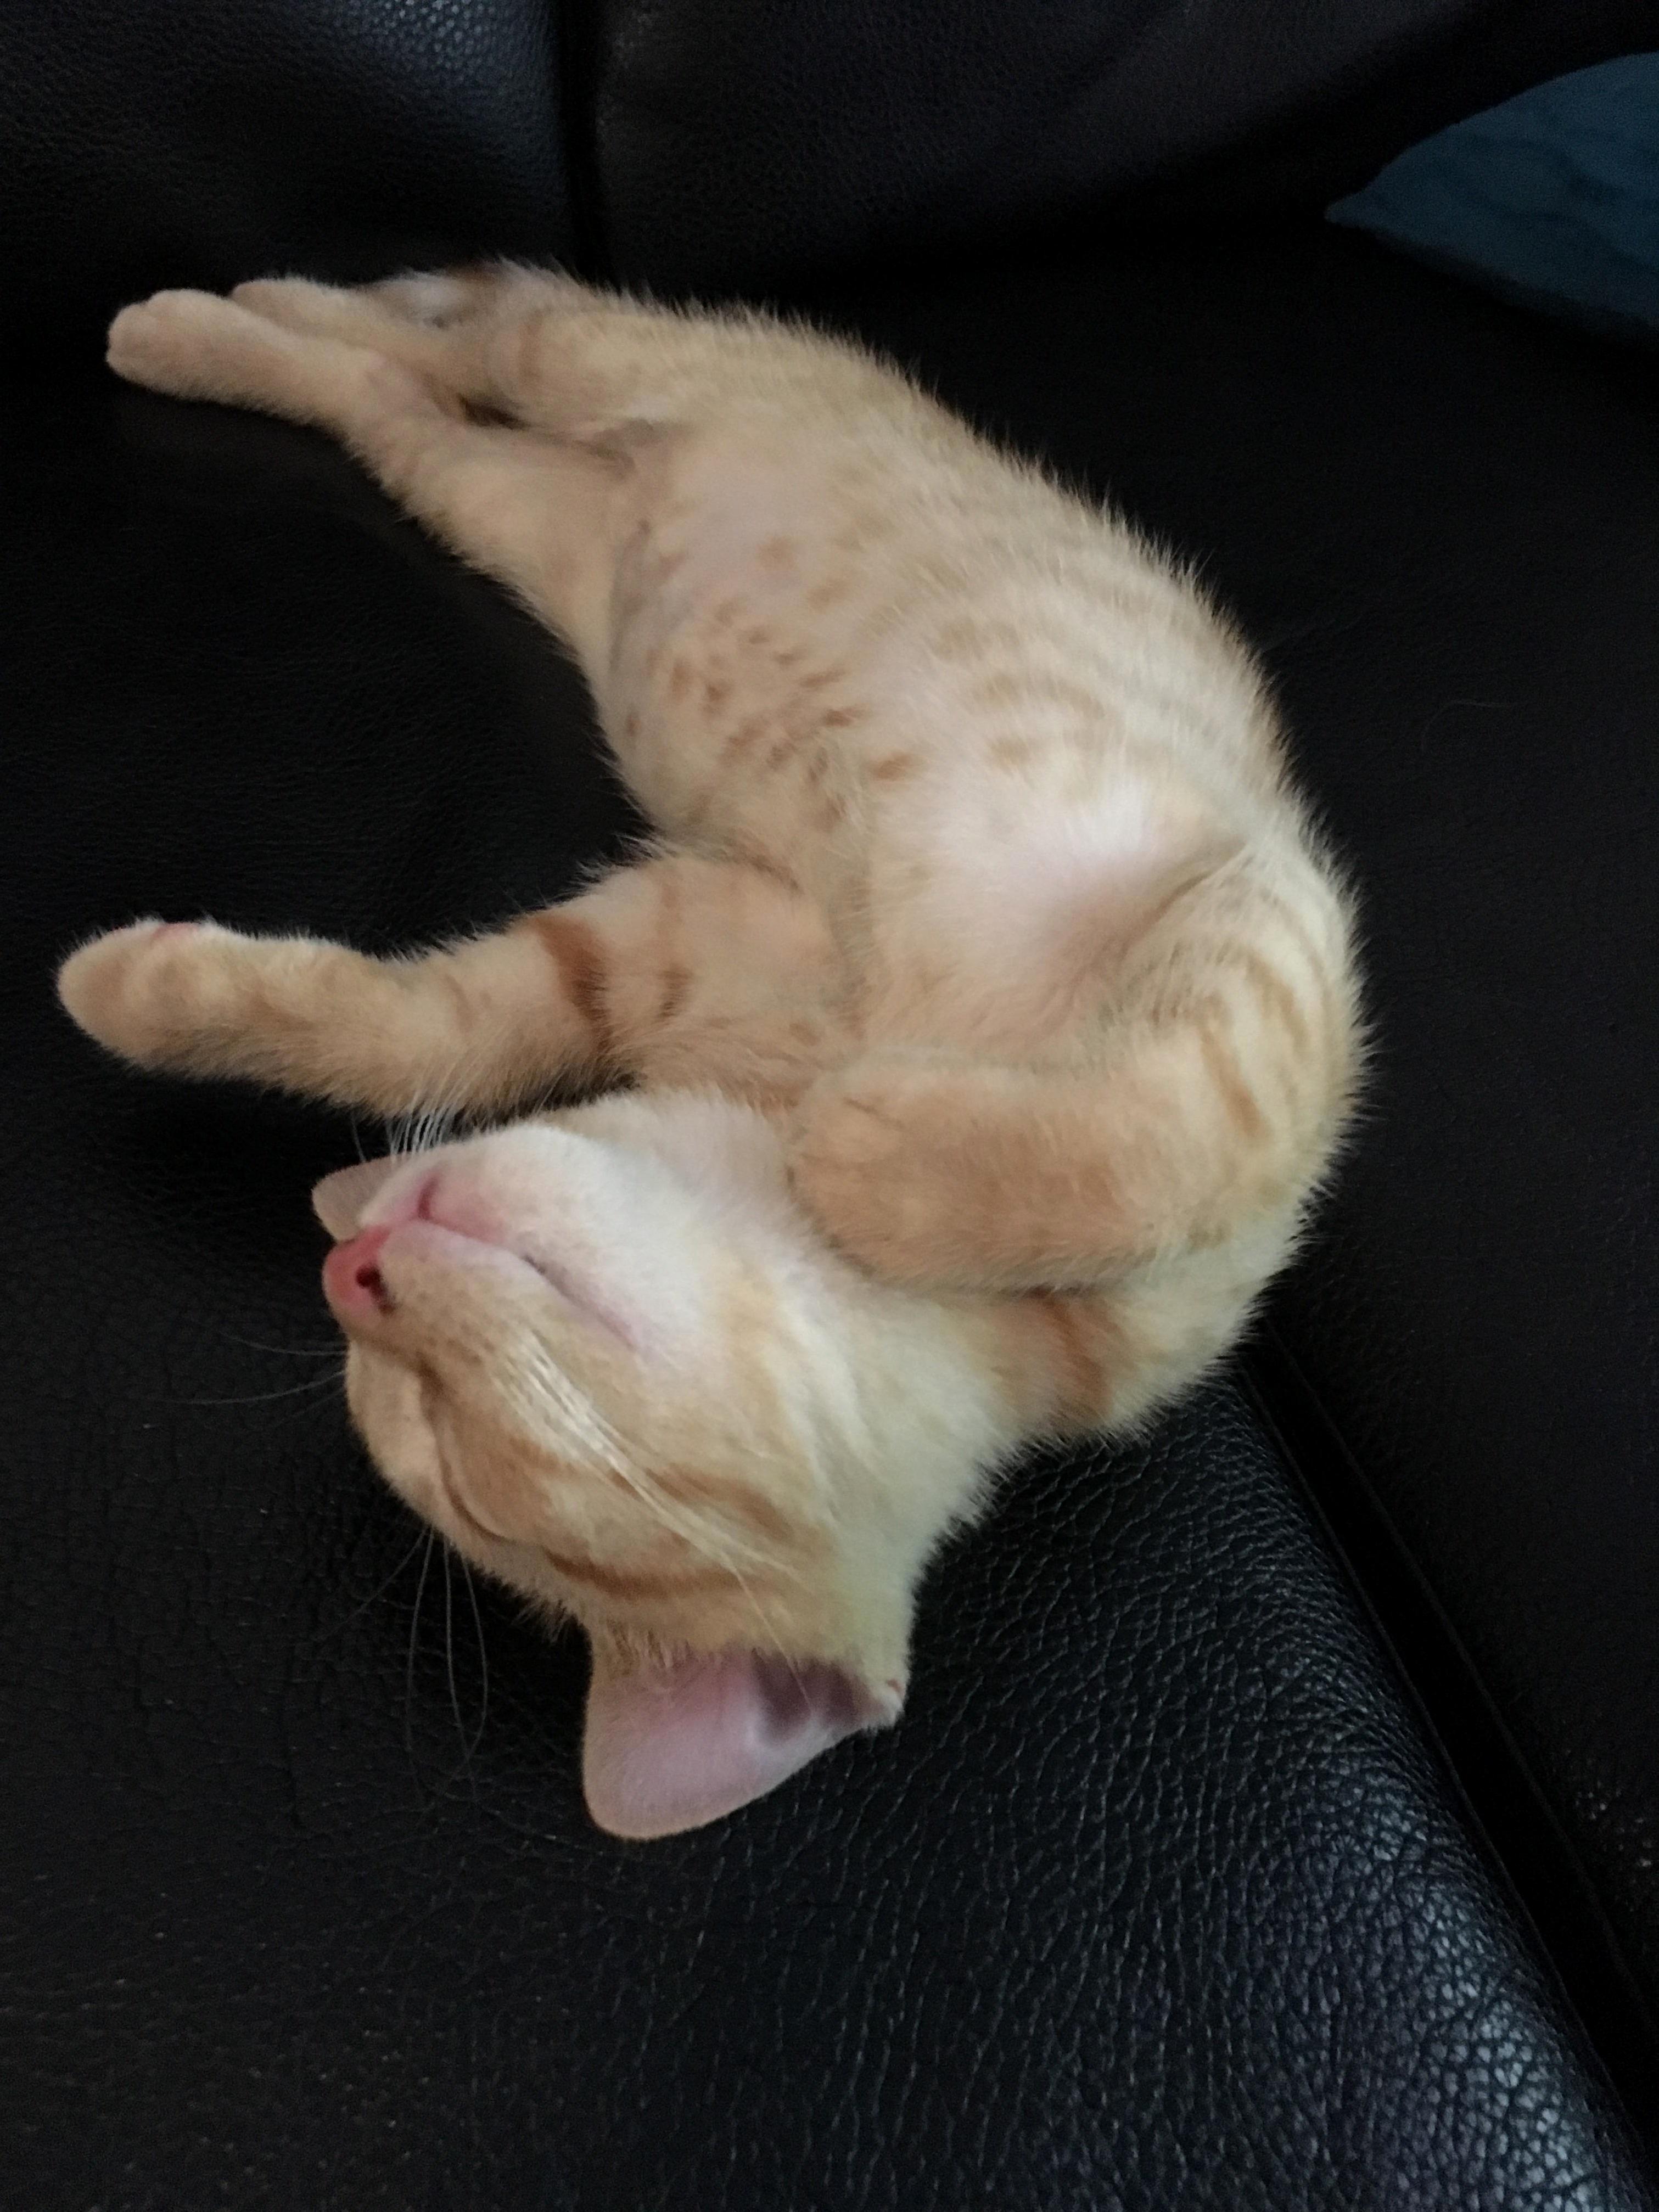 Our foster kitten just having a snooze